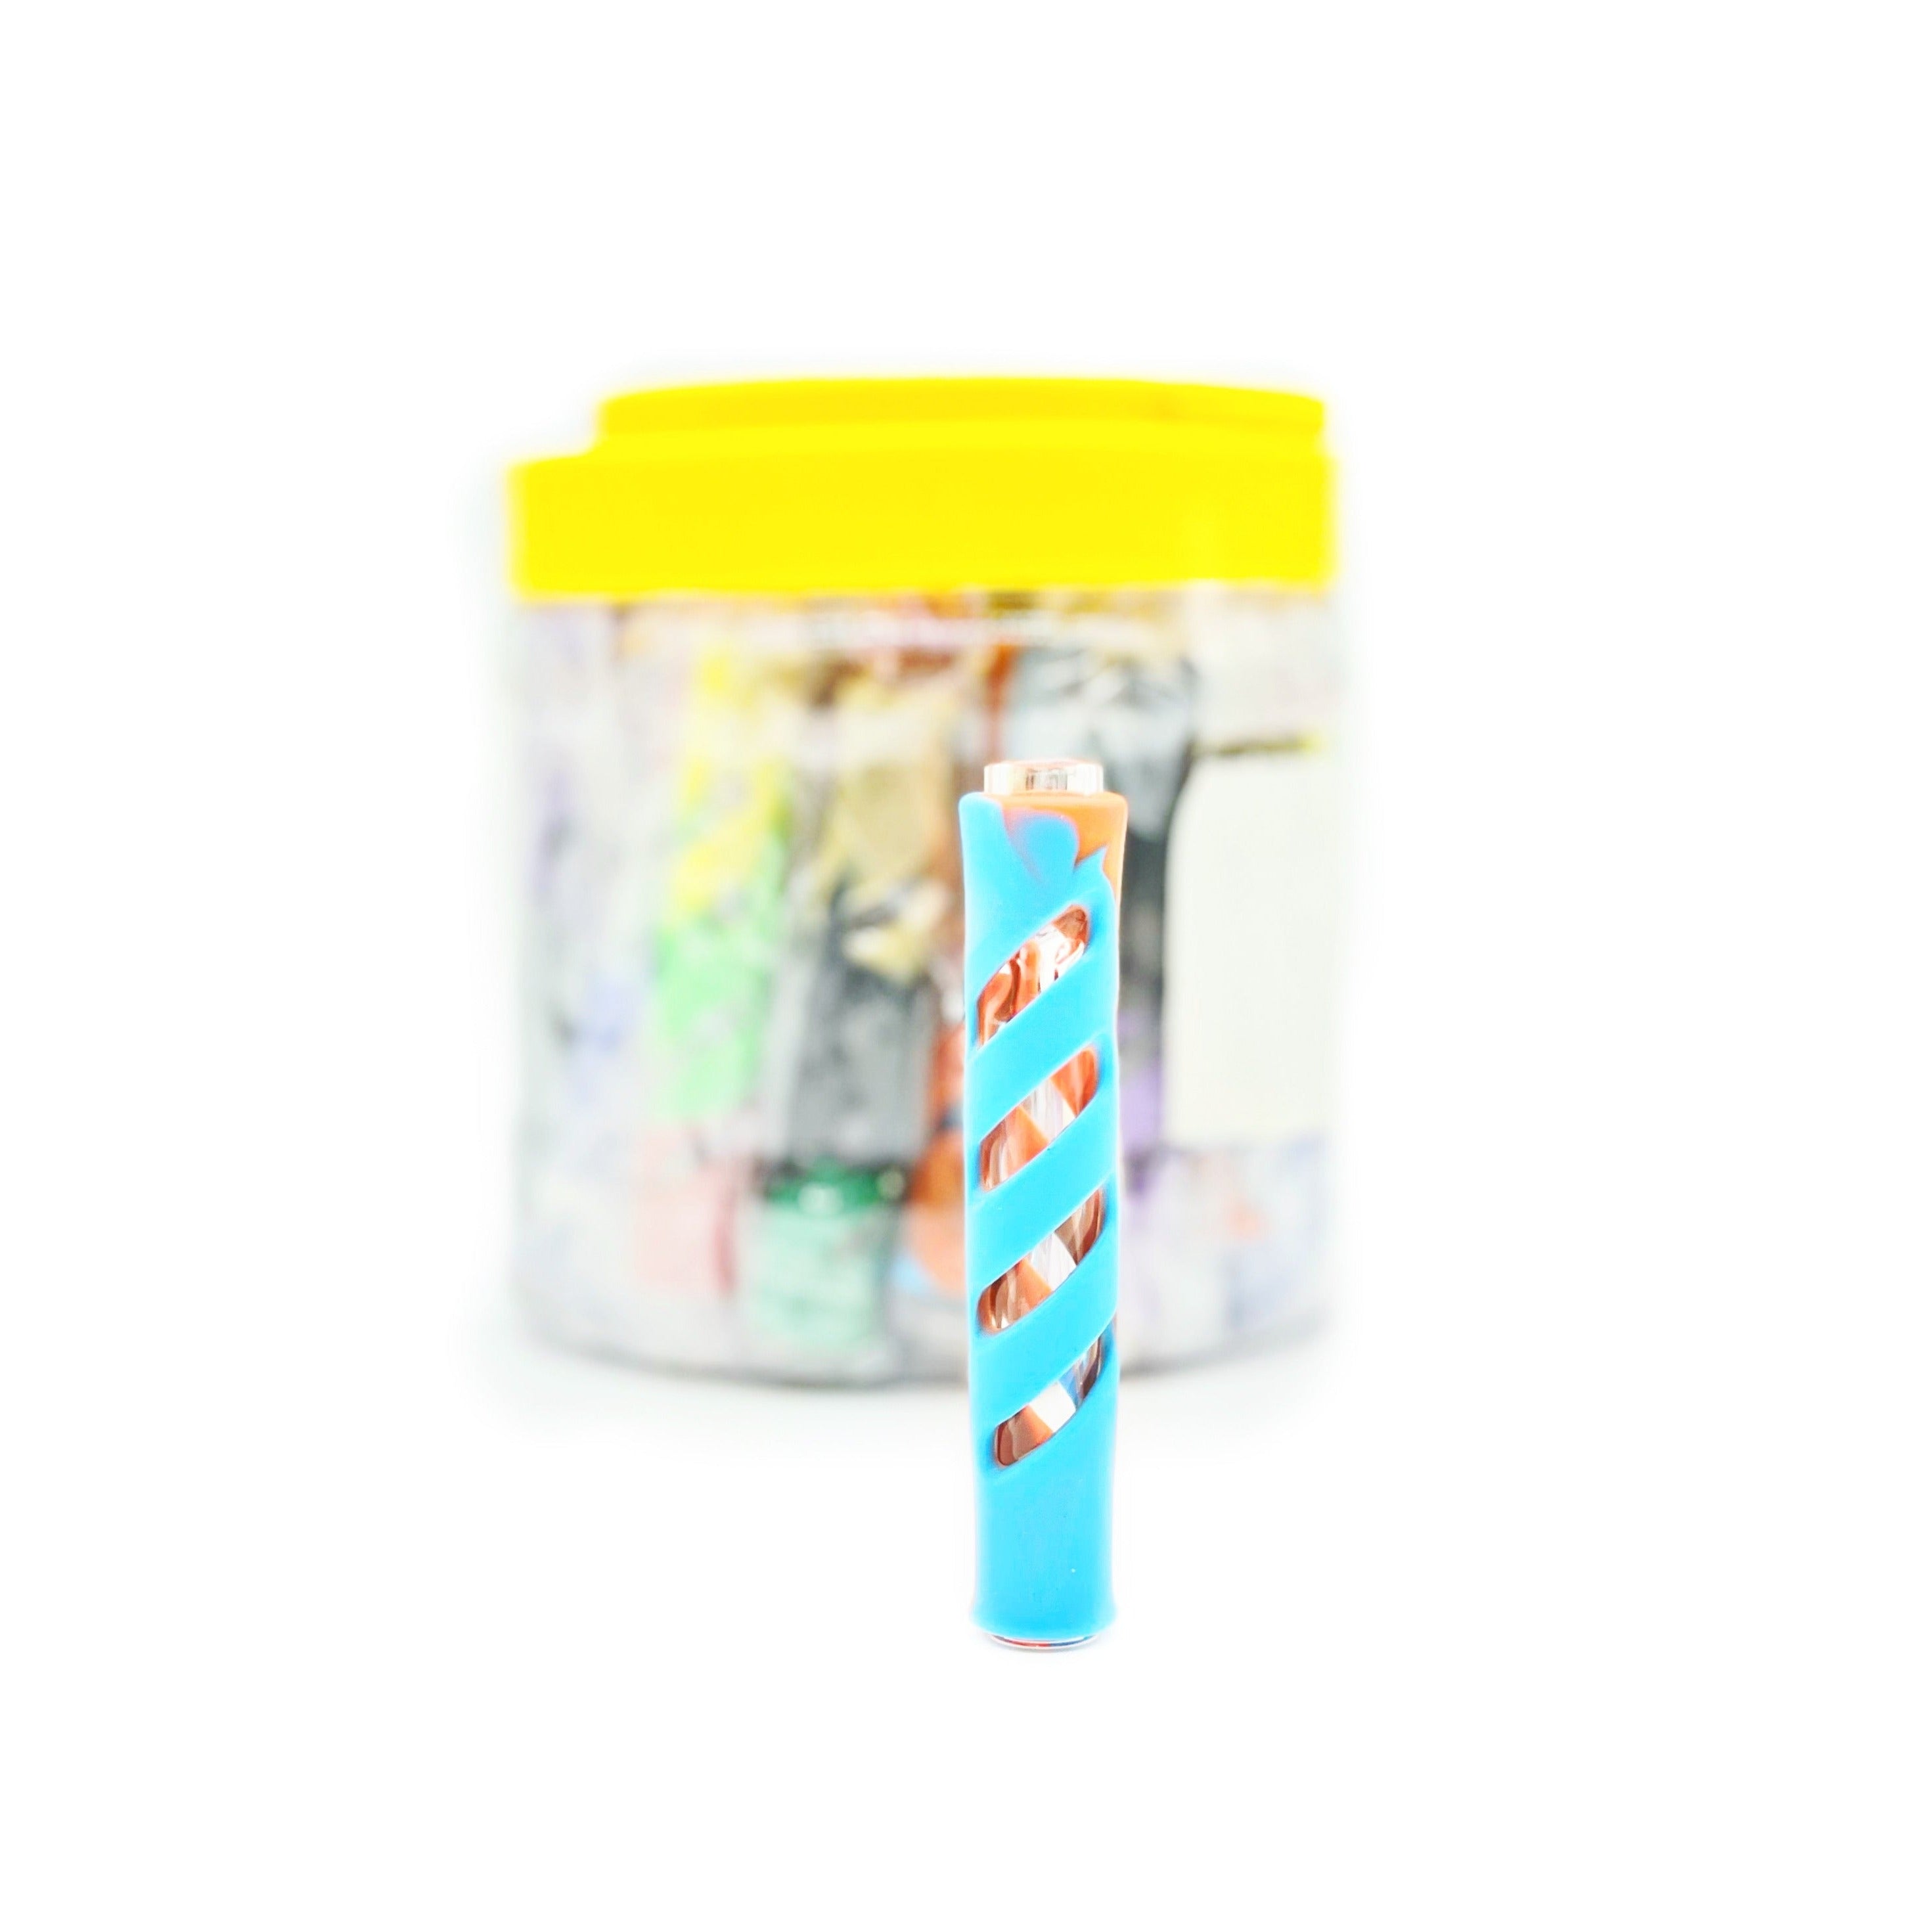 3" Chillium / One Hitter Glass with Colorful Silicone Cover - 1 Jar / 30pcs